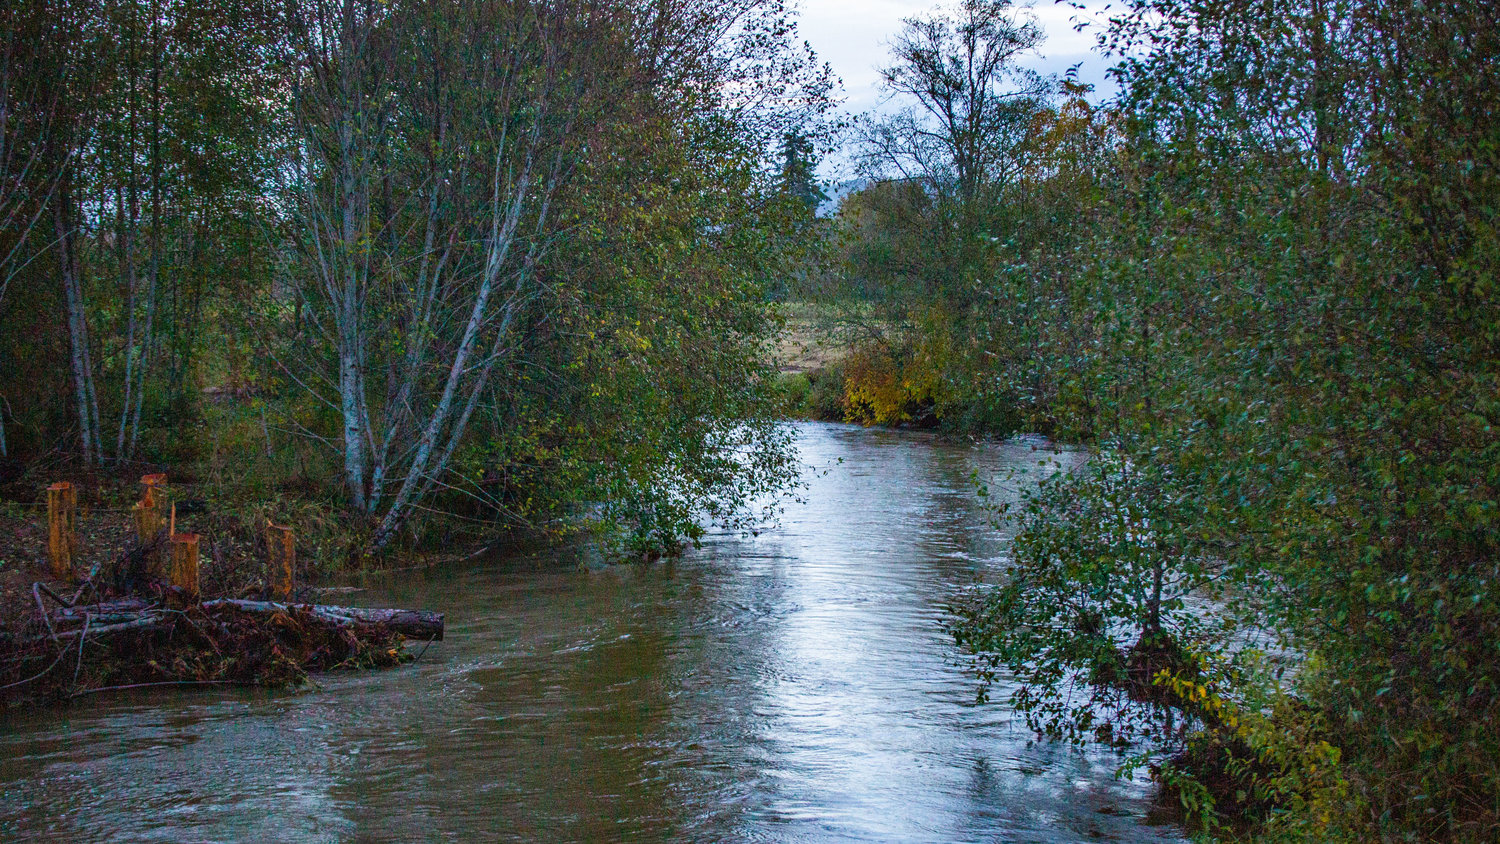 Stillman Creek is pictured from the Lost Valley Road Bridge near dawn on Saturday.